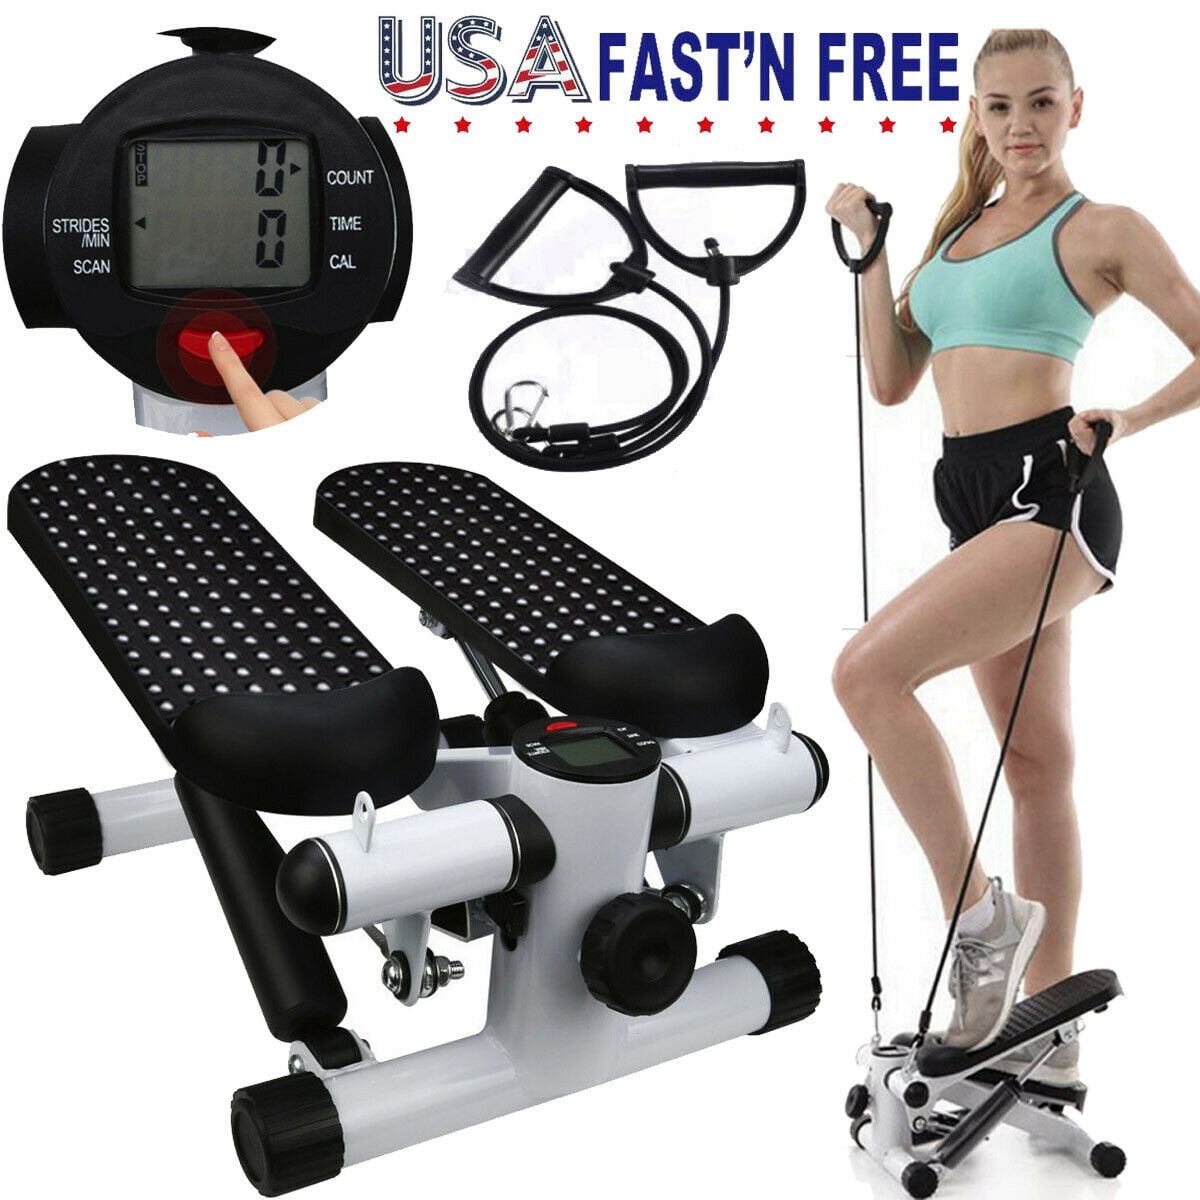 Mini stair Stepper climber LCD Monitor Great Low Impact Cardio Home Gym fitness 